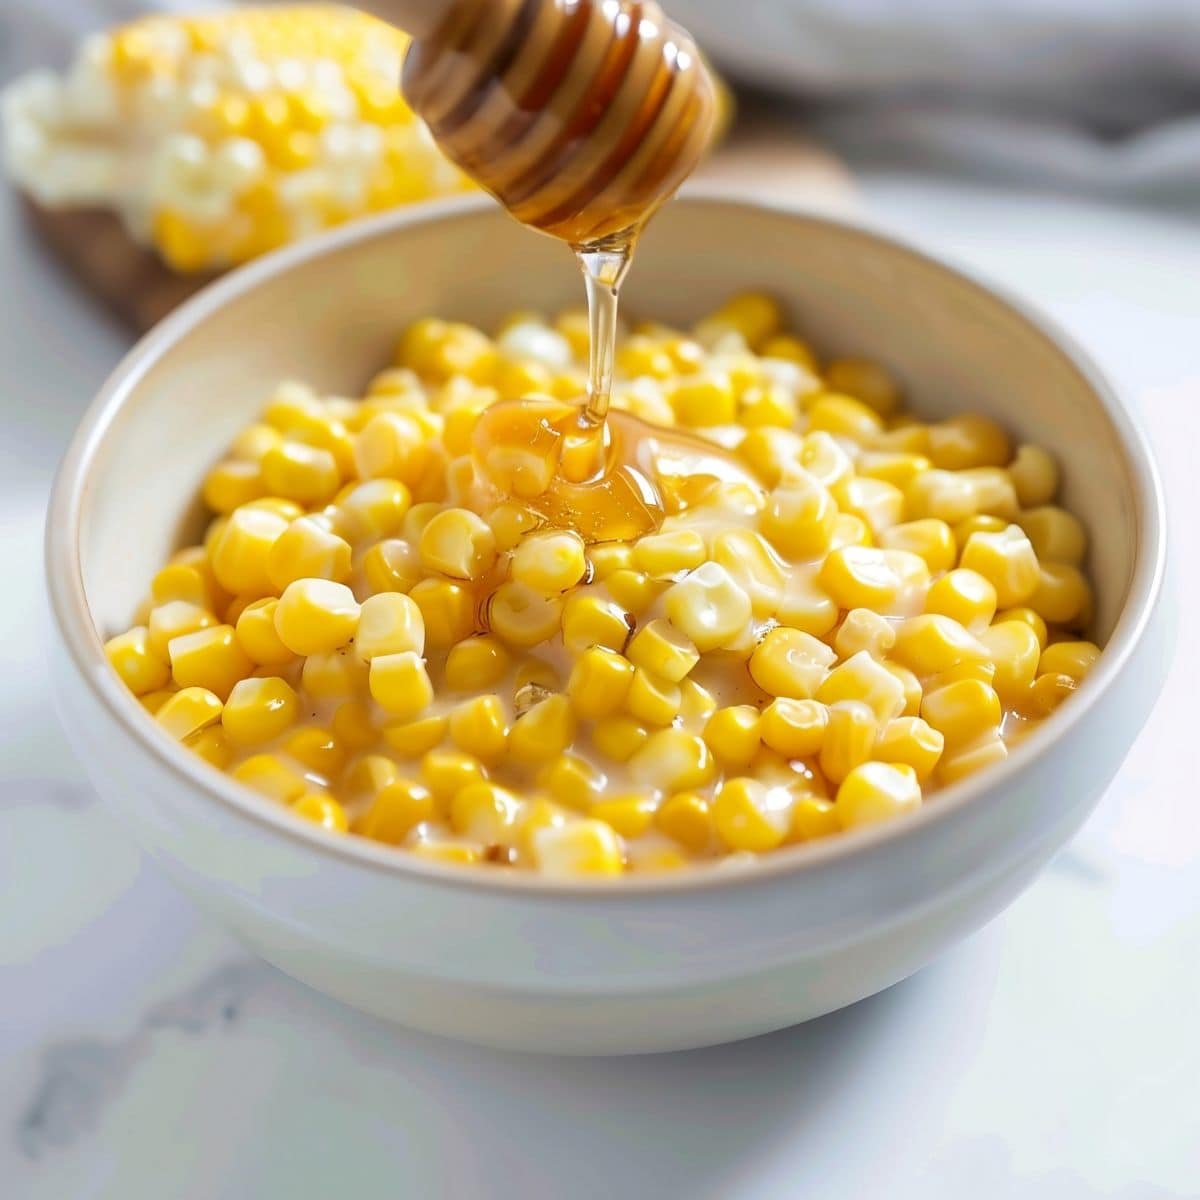 Bowl of creamy corn kernels dripped with honey